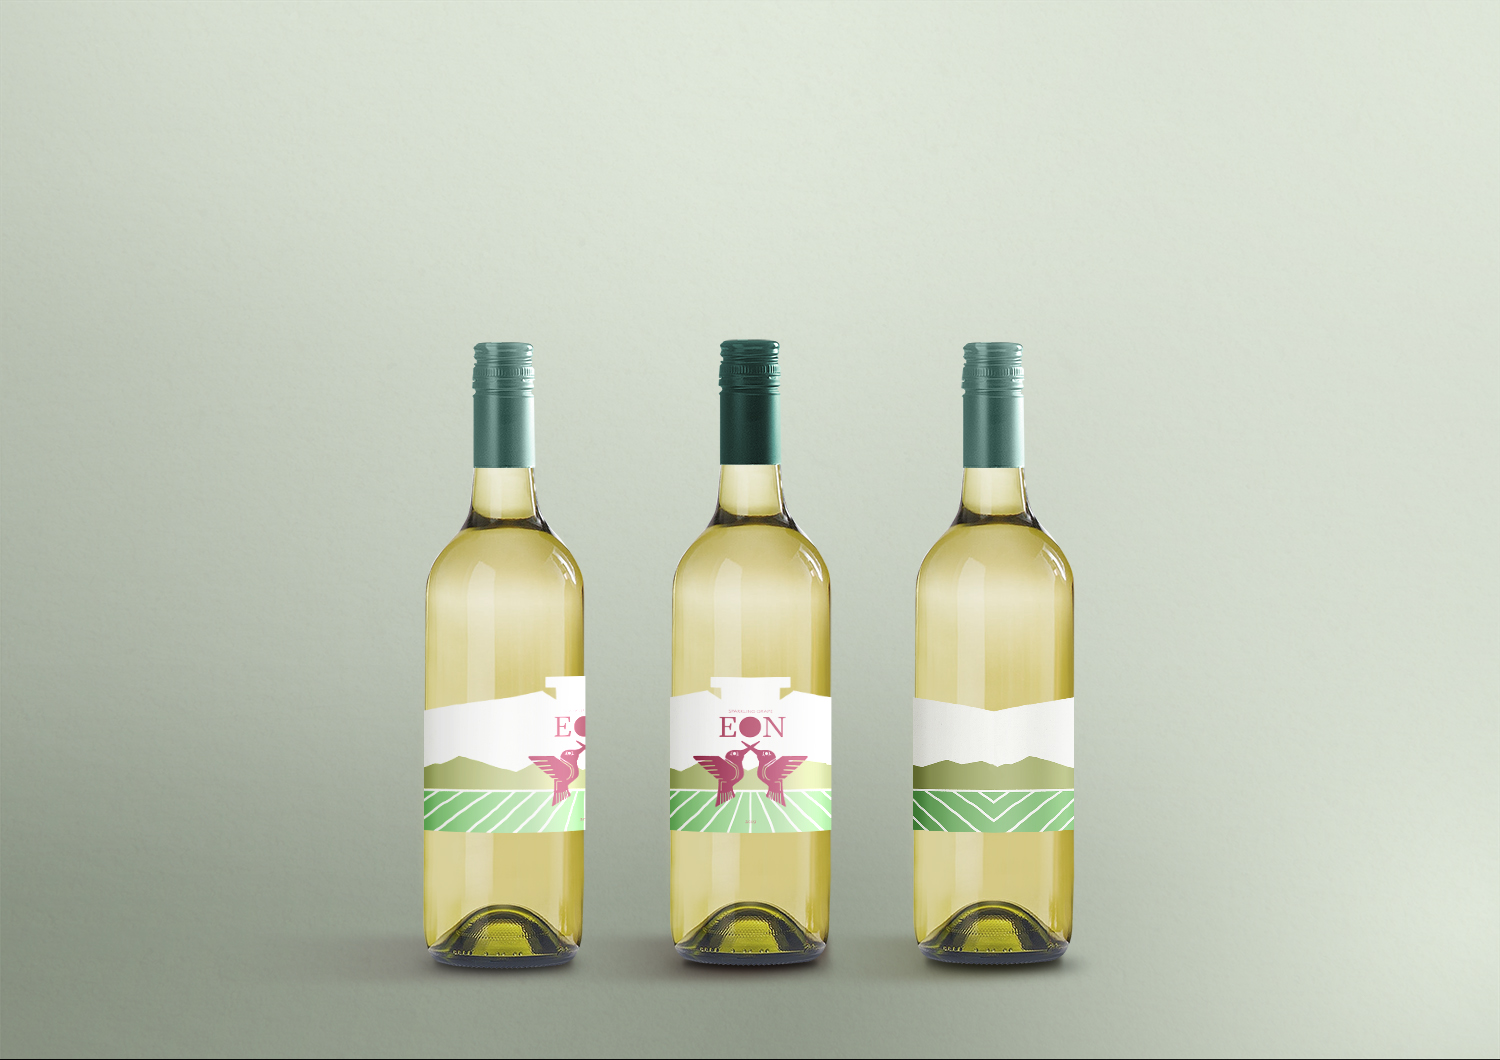 3 wine bottles displaying a wraparound lable that has an illustration of two hummingbirds crossing beaks